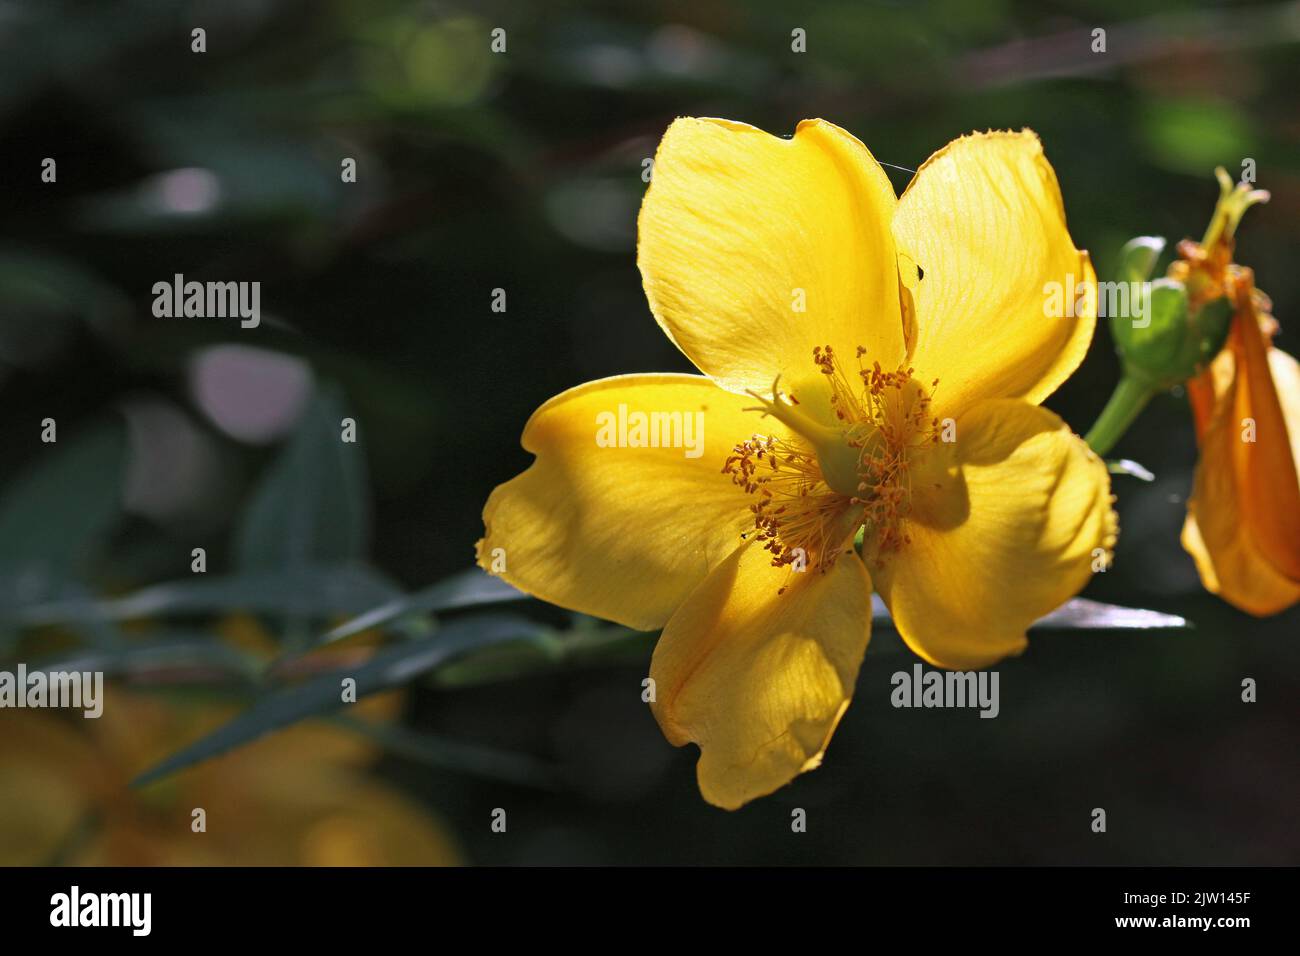 Rose of Sharon, Hypericum species, yellow flower in close up highlighted in a patch of sunlight with a dark blurred background of leaves. Stock Photo